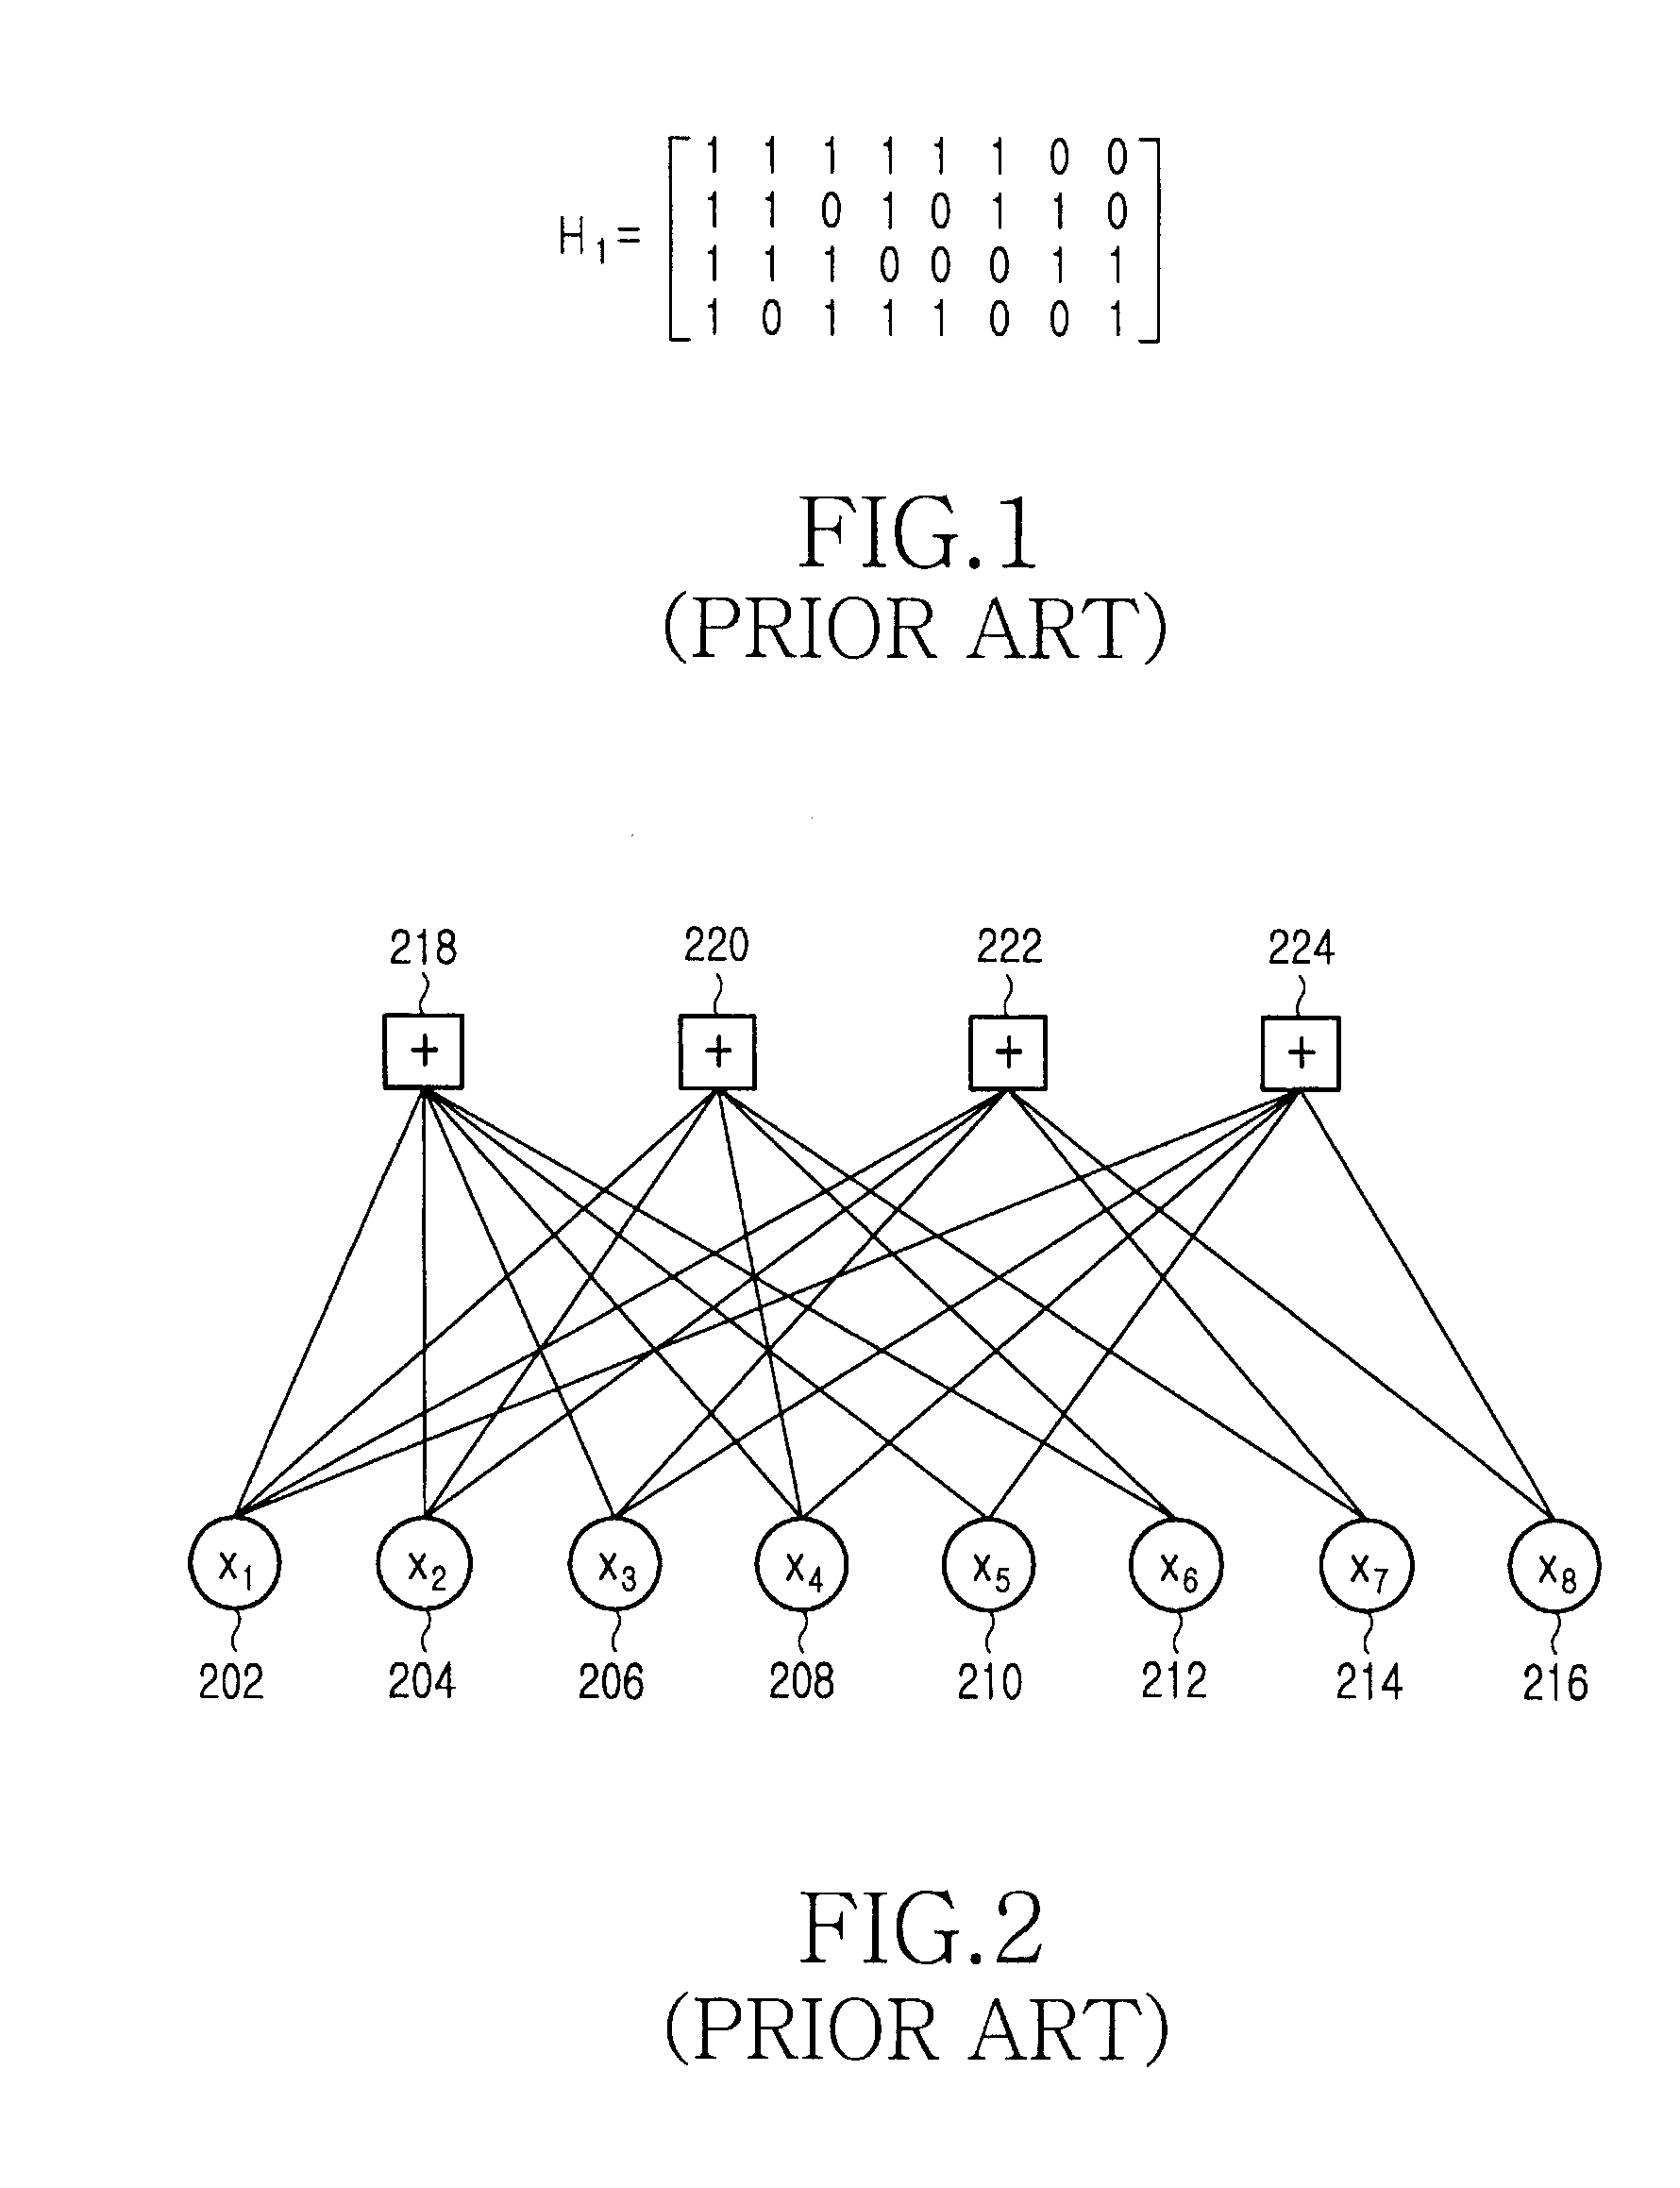 Method and apparatus for encoding and decoding channel in a communication system using low-density parity-check codes